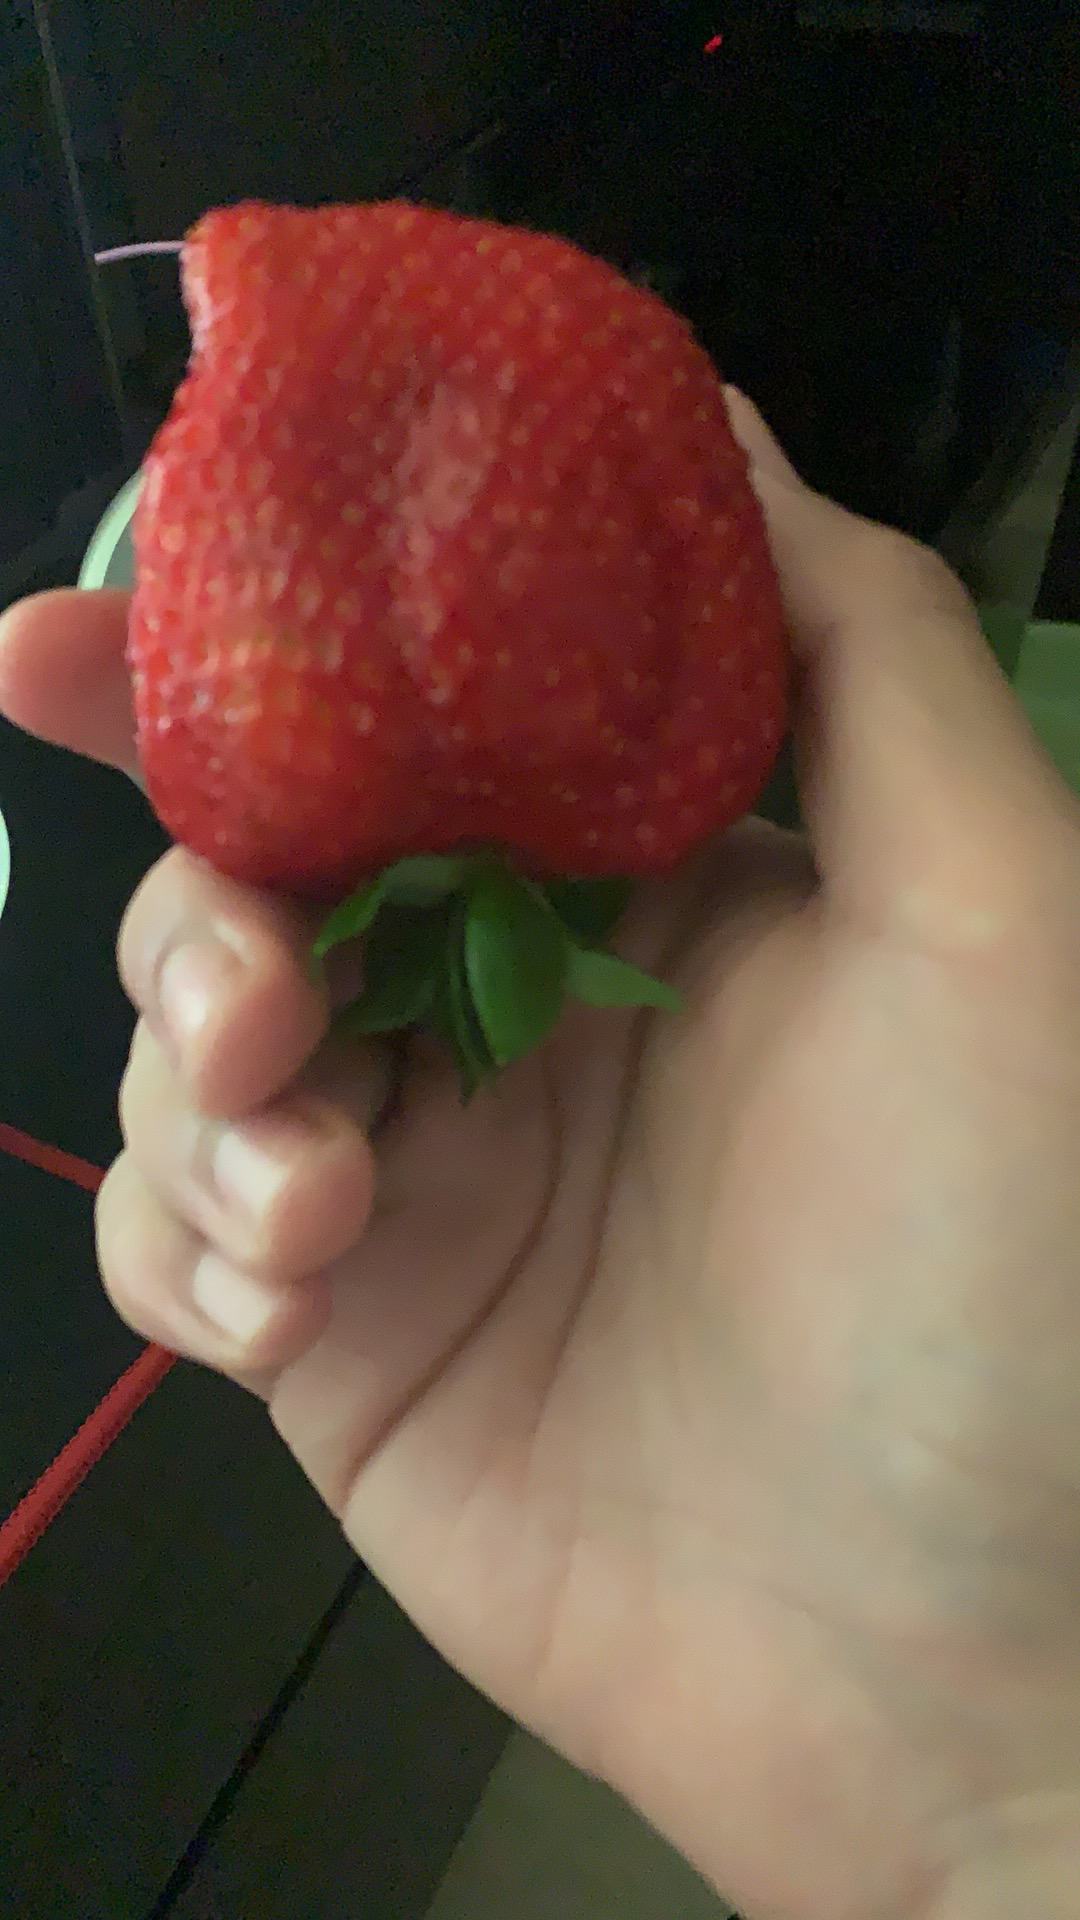 Holding a huge strawberry with my right hand.